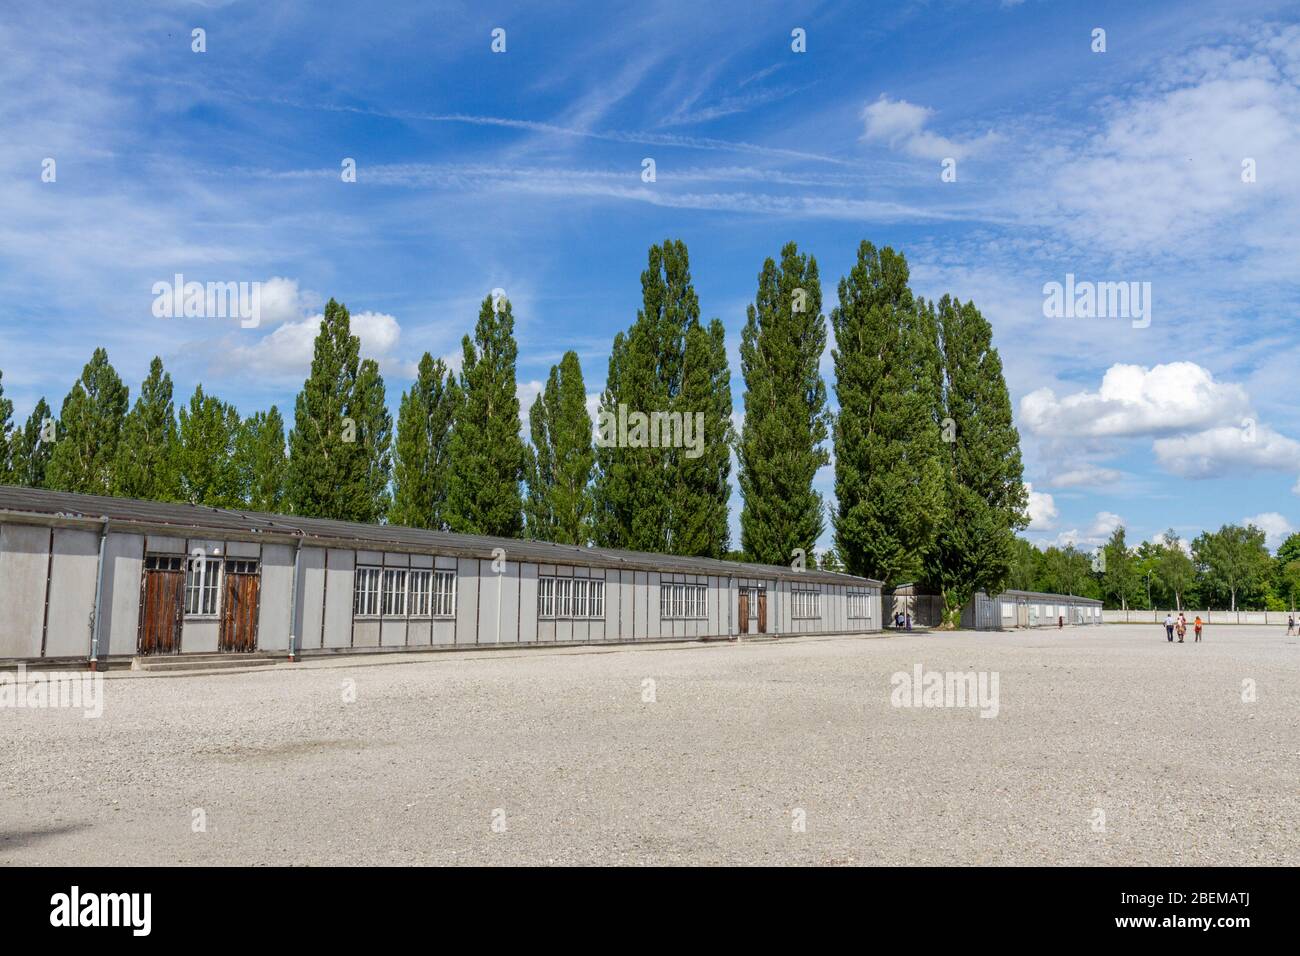 Barrack buildings (reconstructed) inside the former Nazi German Dachau concentration camp, Munich, Germany. Stock Photo